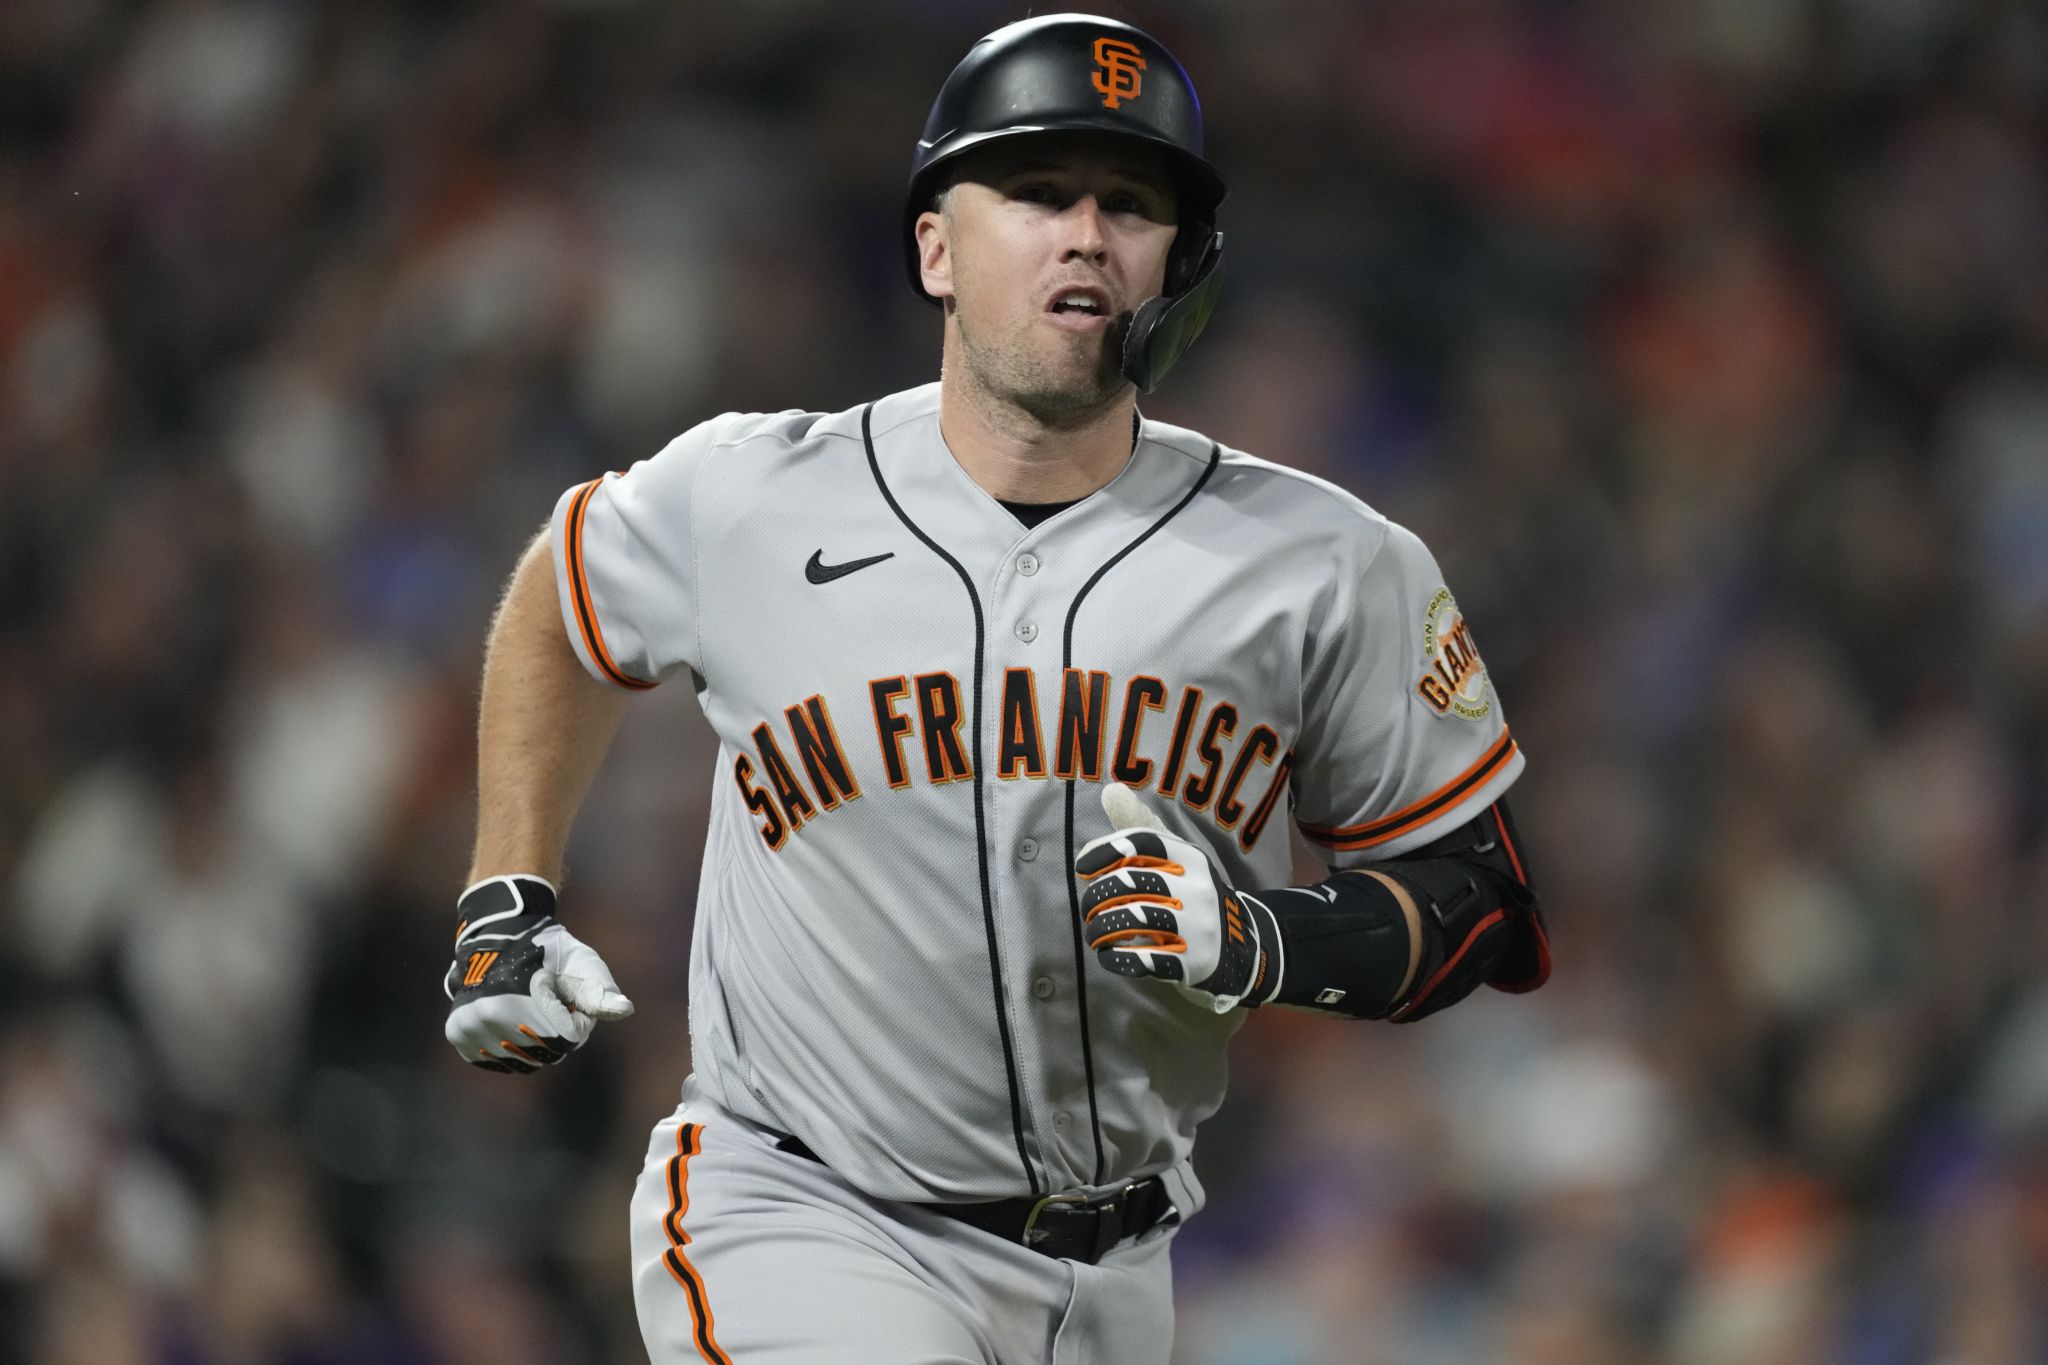 Ex-Giant Buster Posey sells East Bay home for over $9M